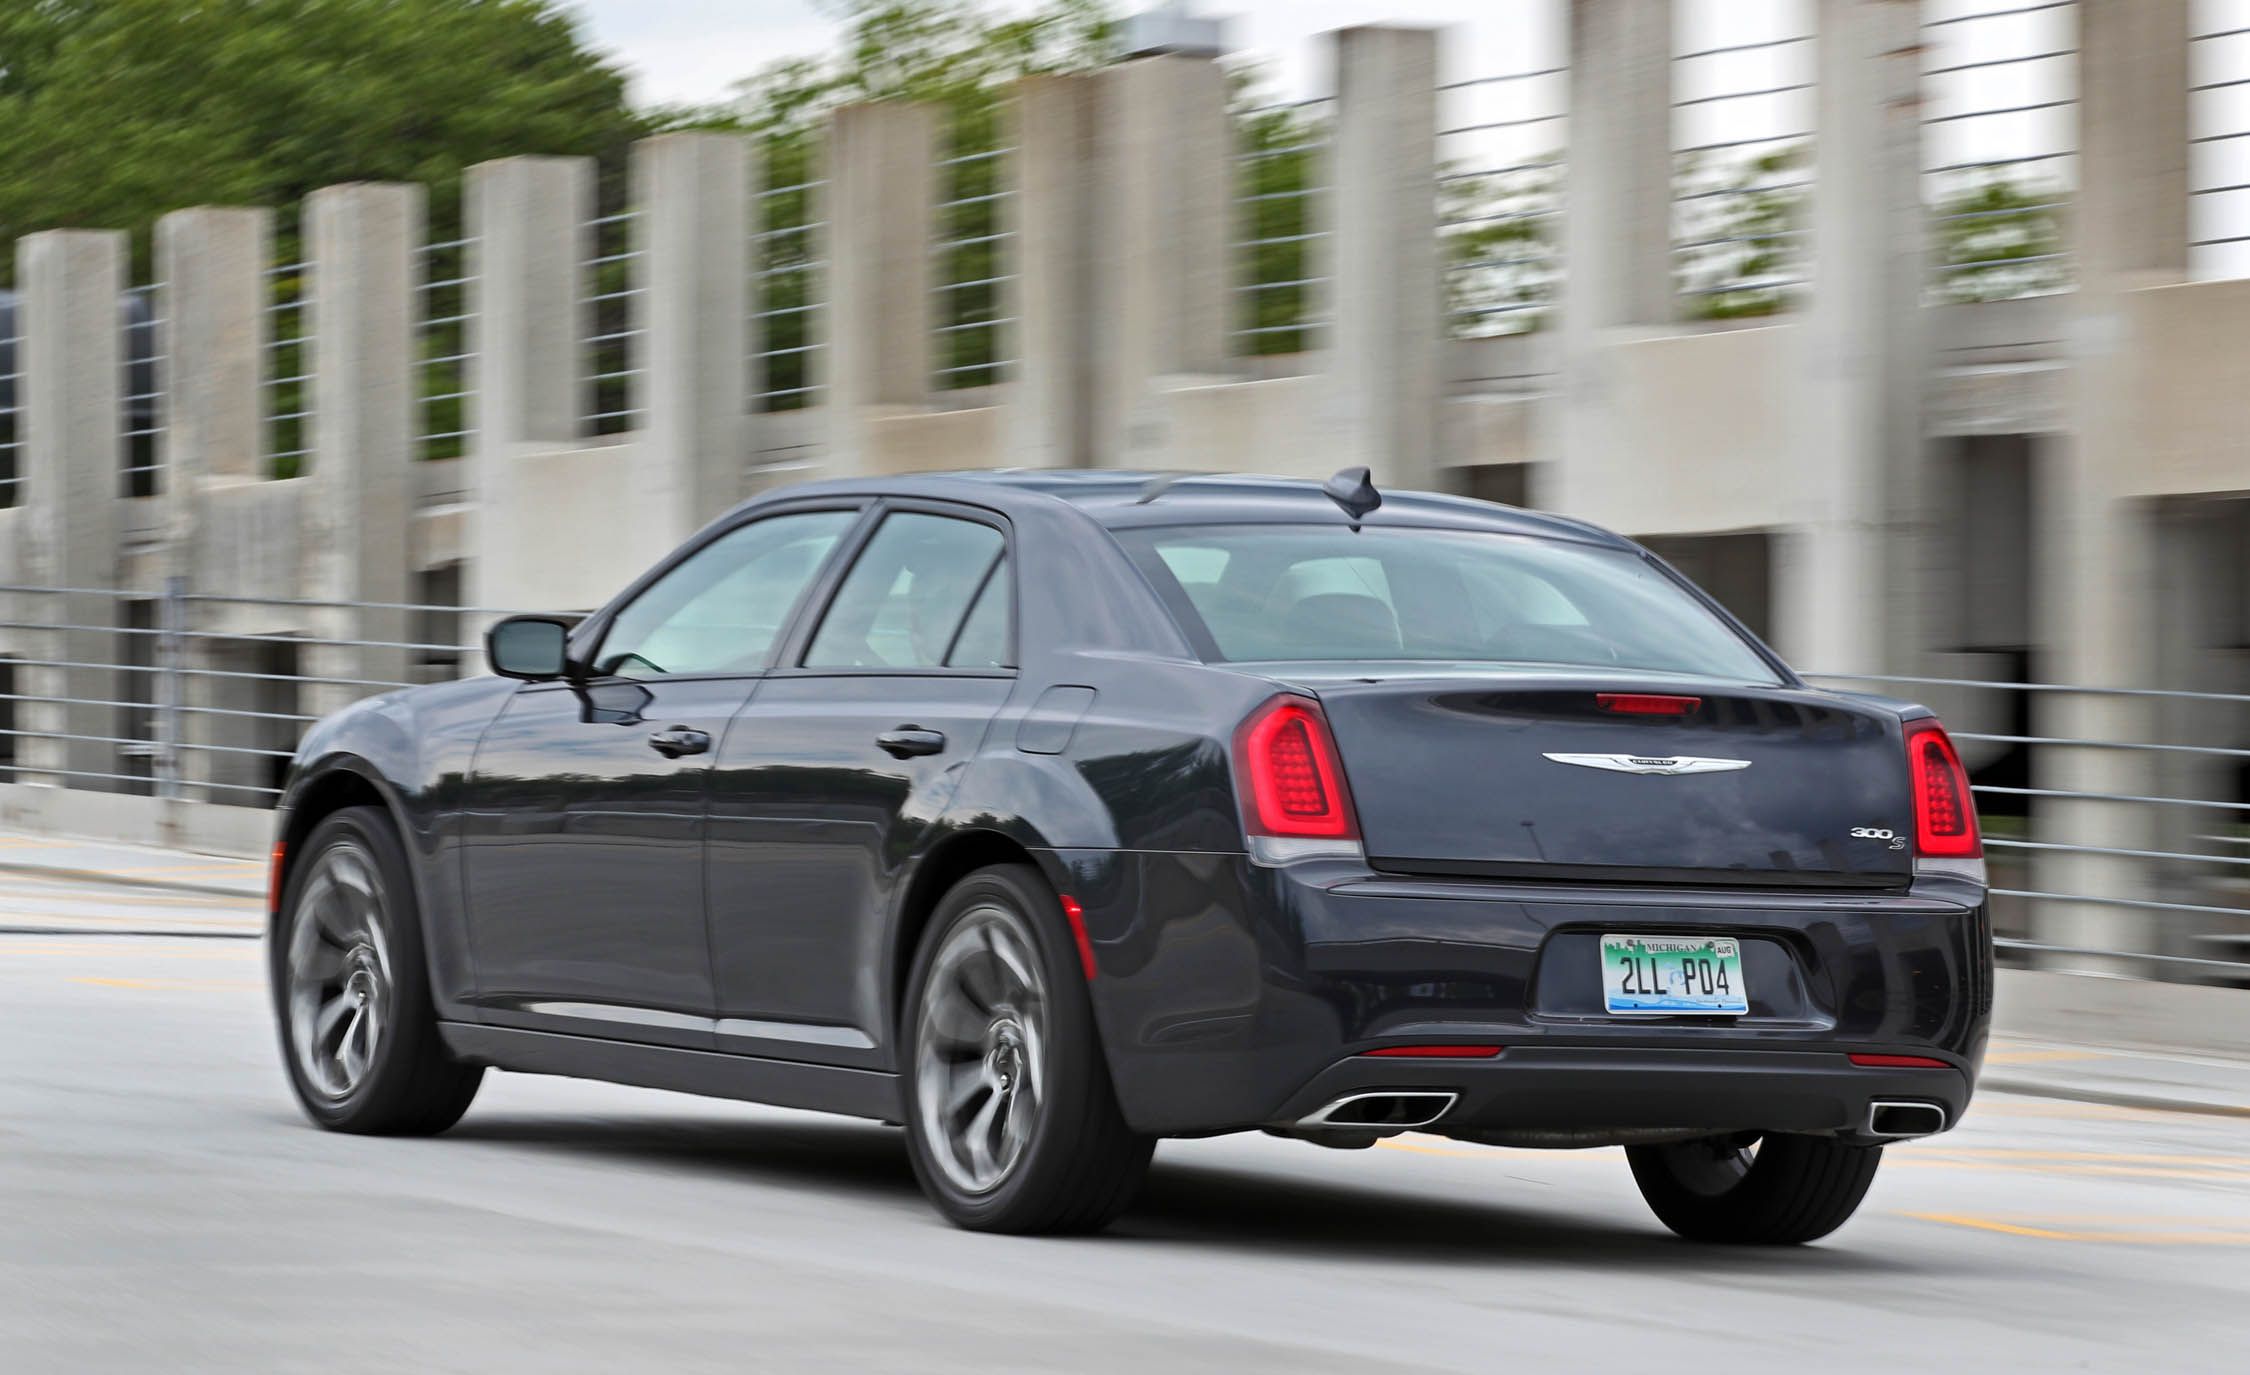 2013 chrysler 300 review car and driver